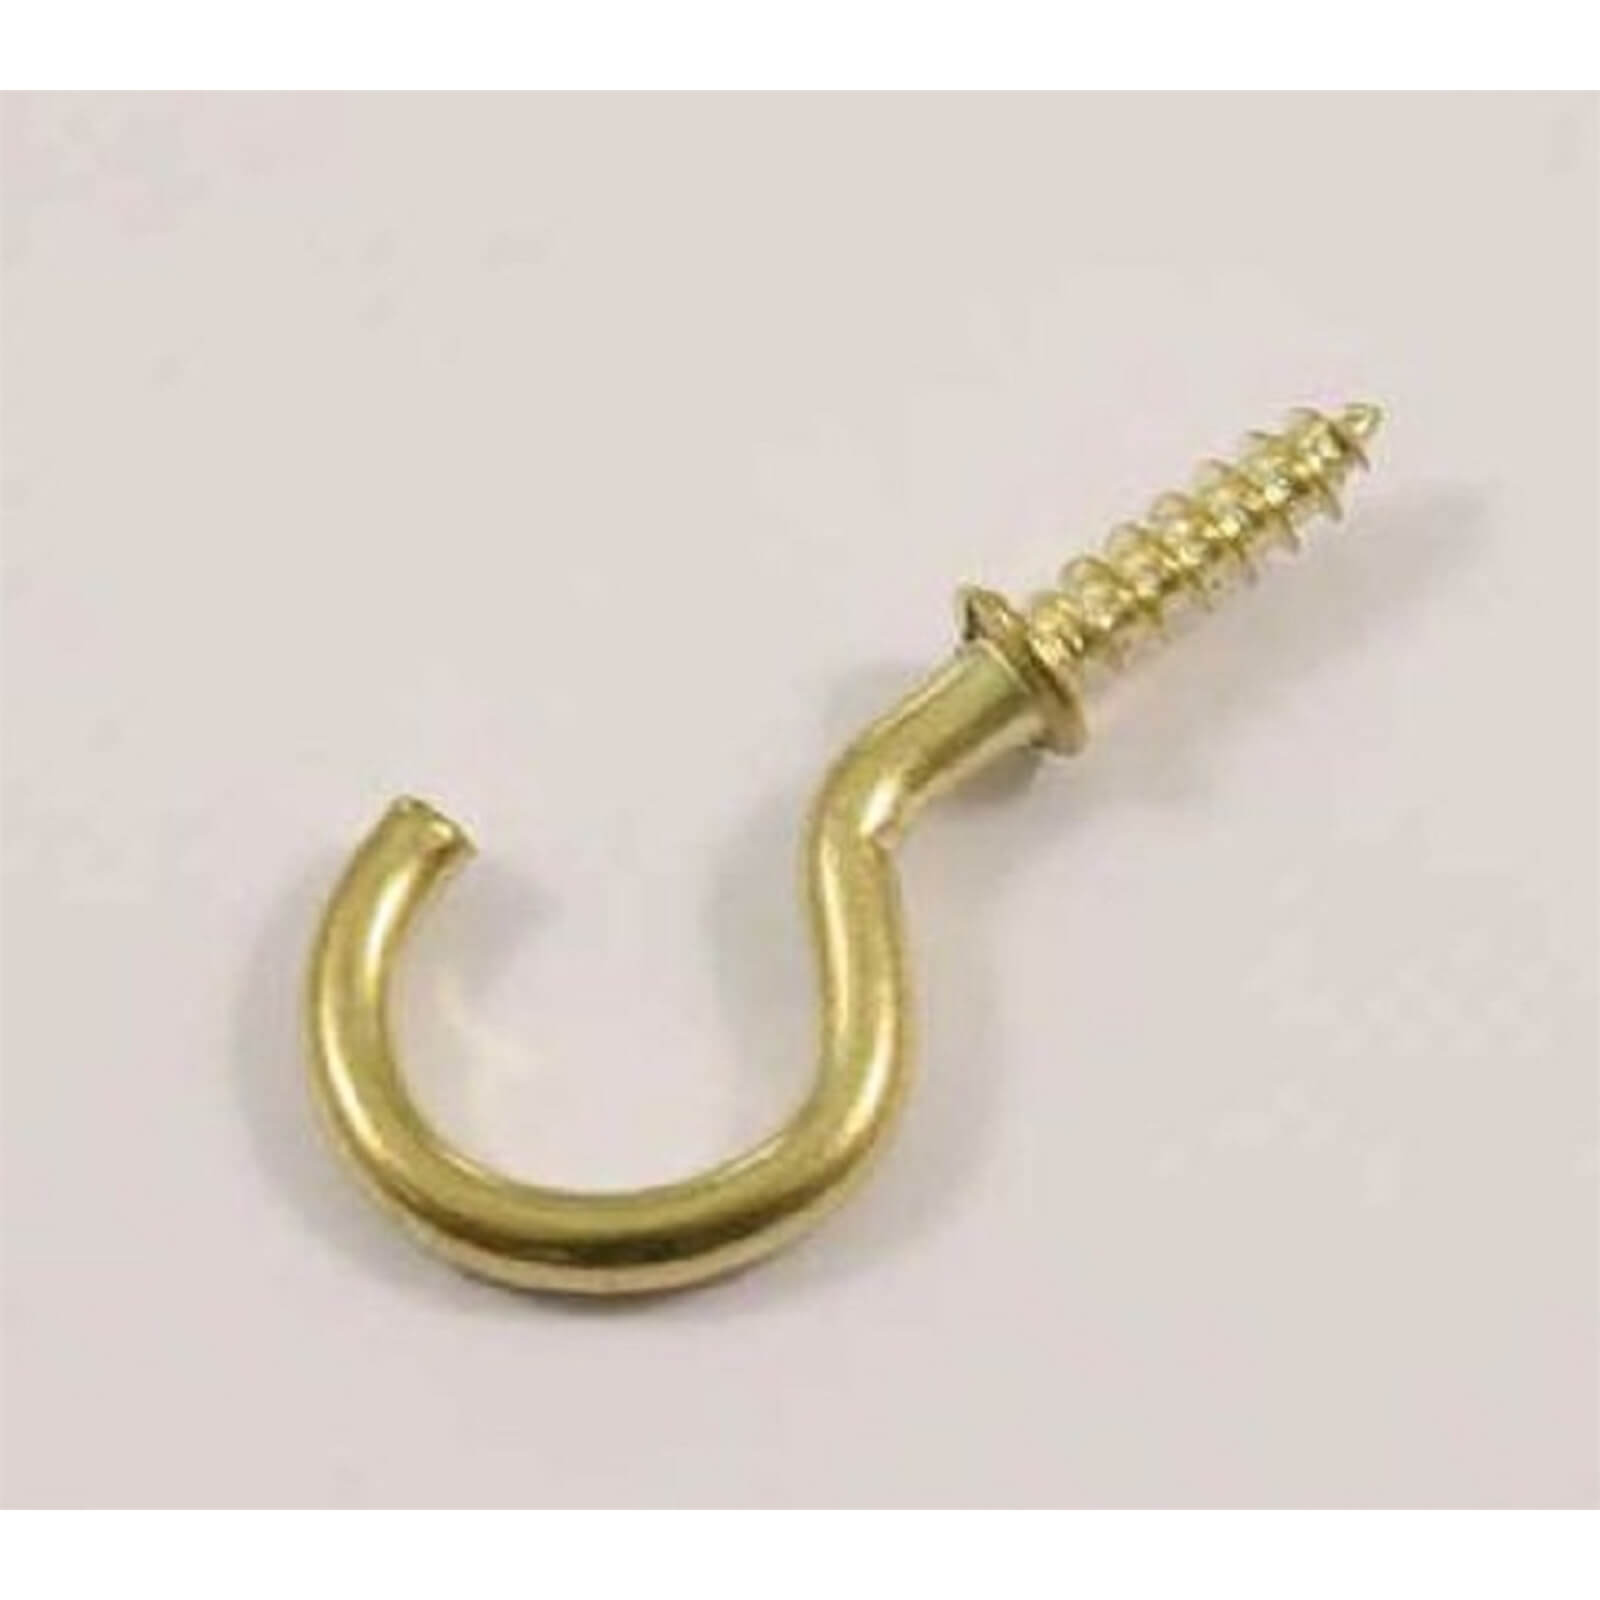 Photo of Round Cup Hook - Brass - 19mm - 5 Pack